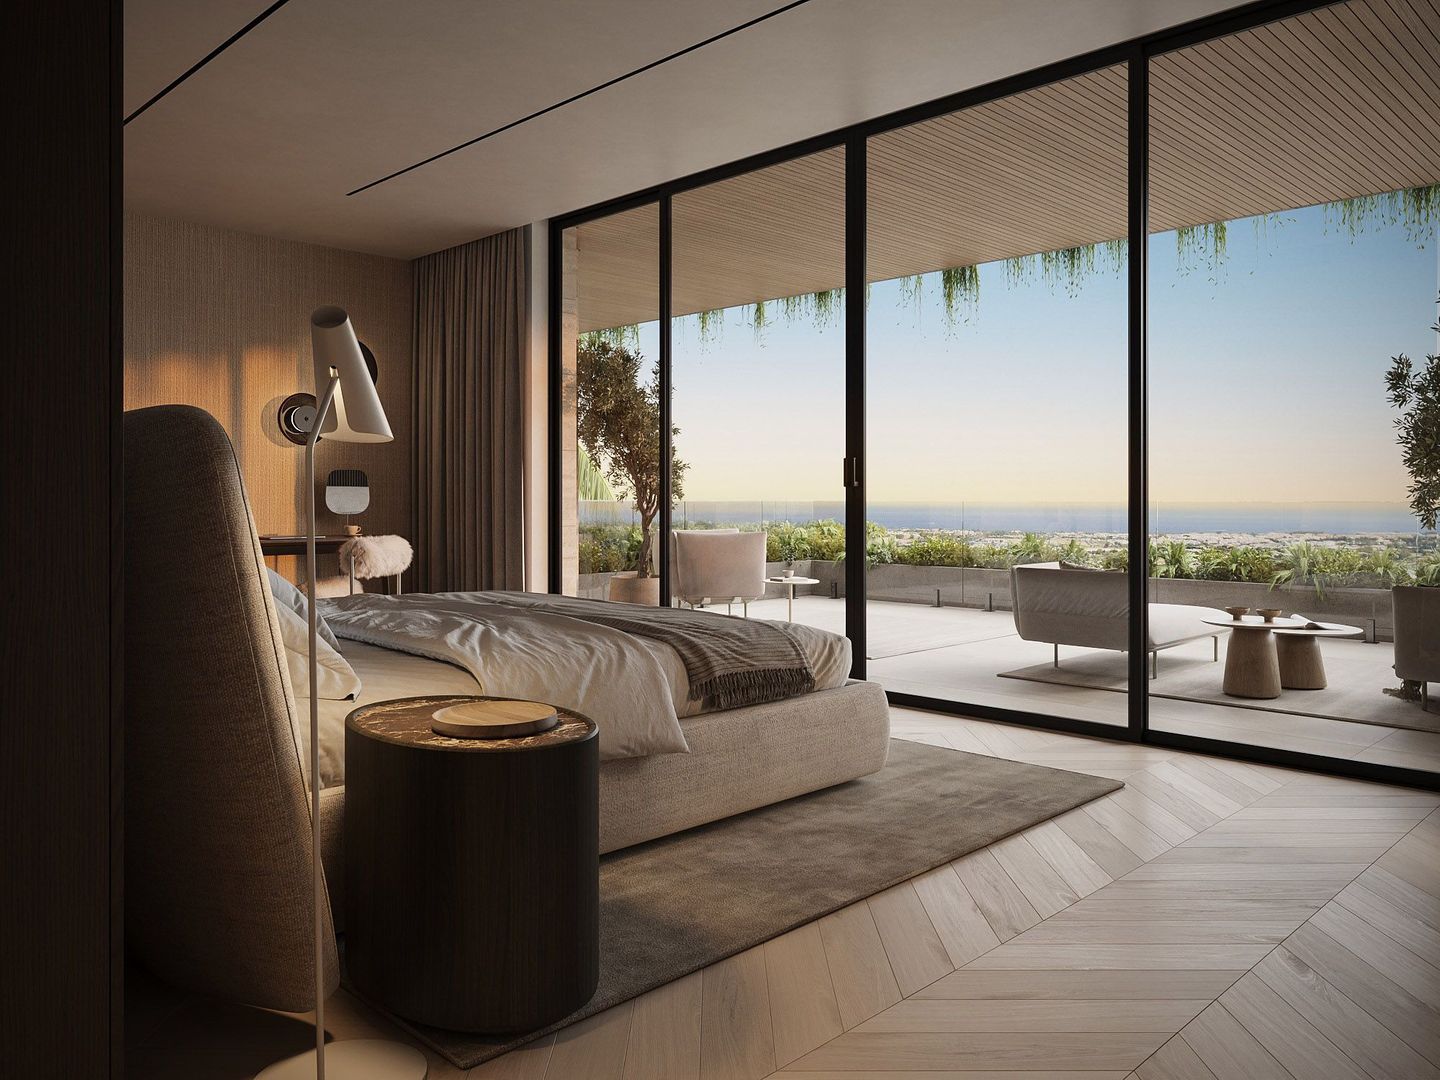 One of the most exciting property launches in Marbella, Benahavis foto-16